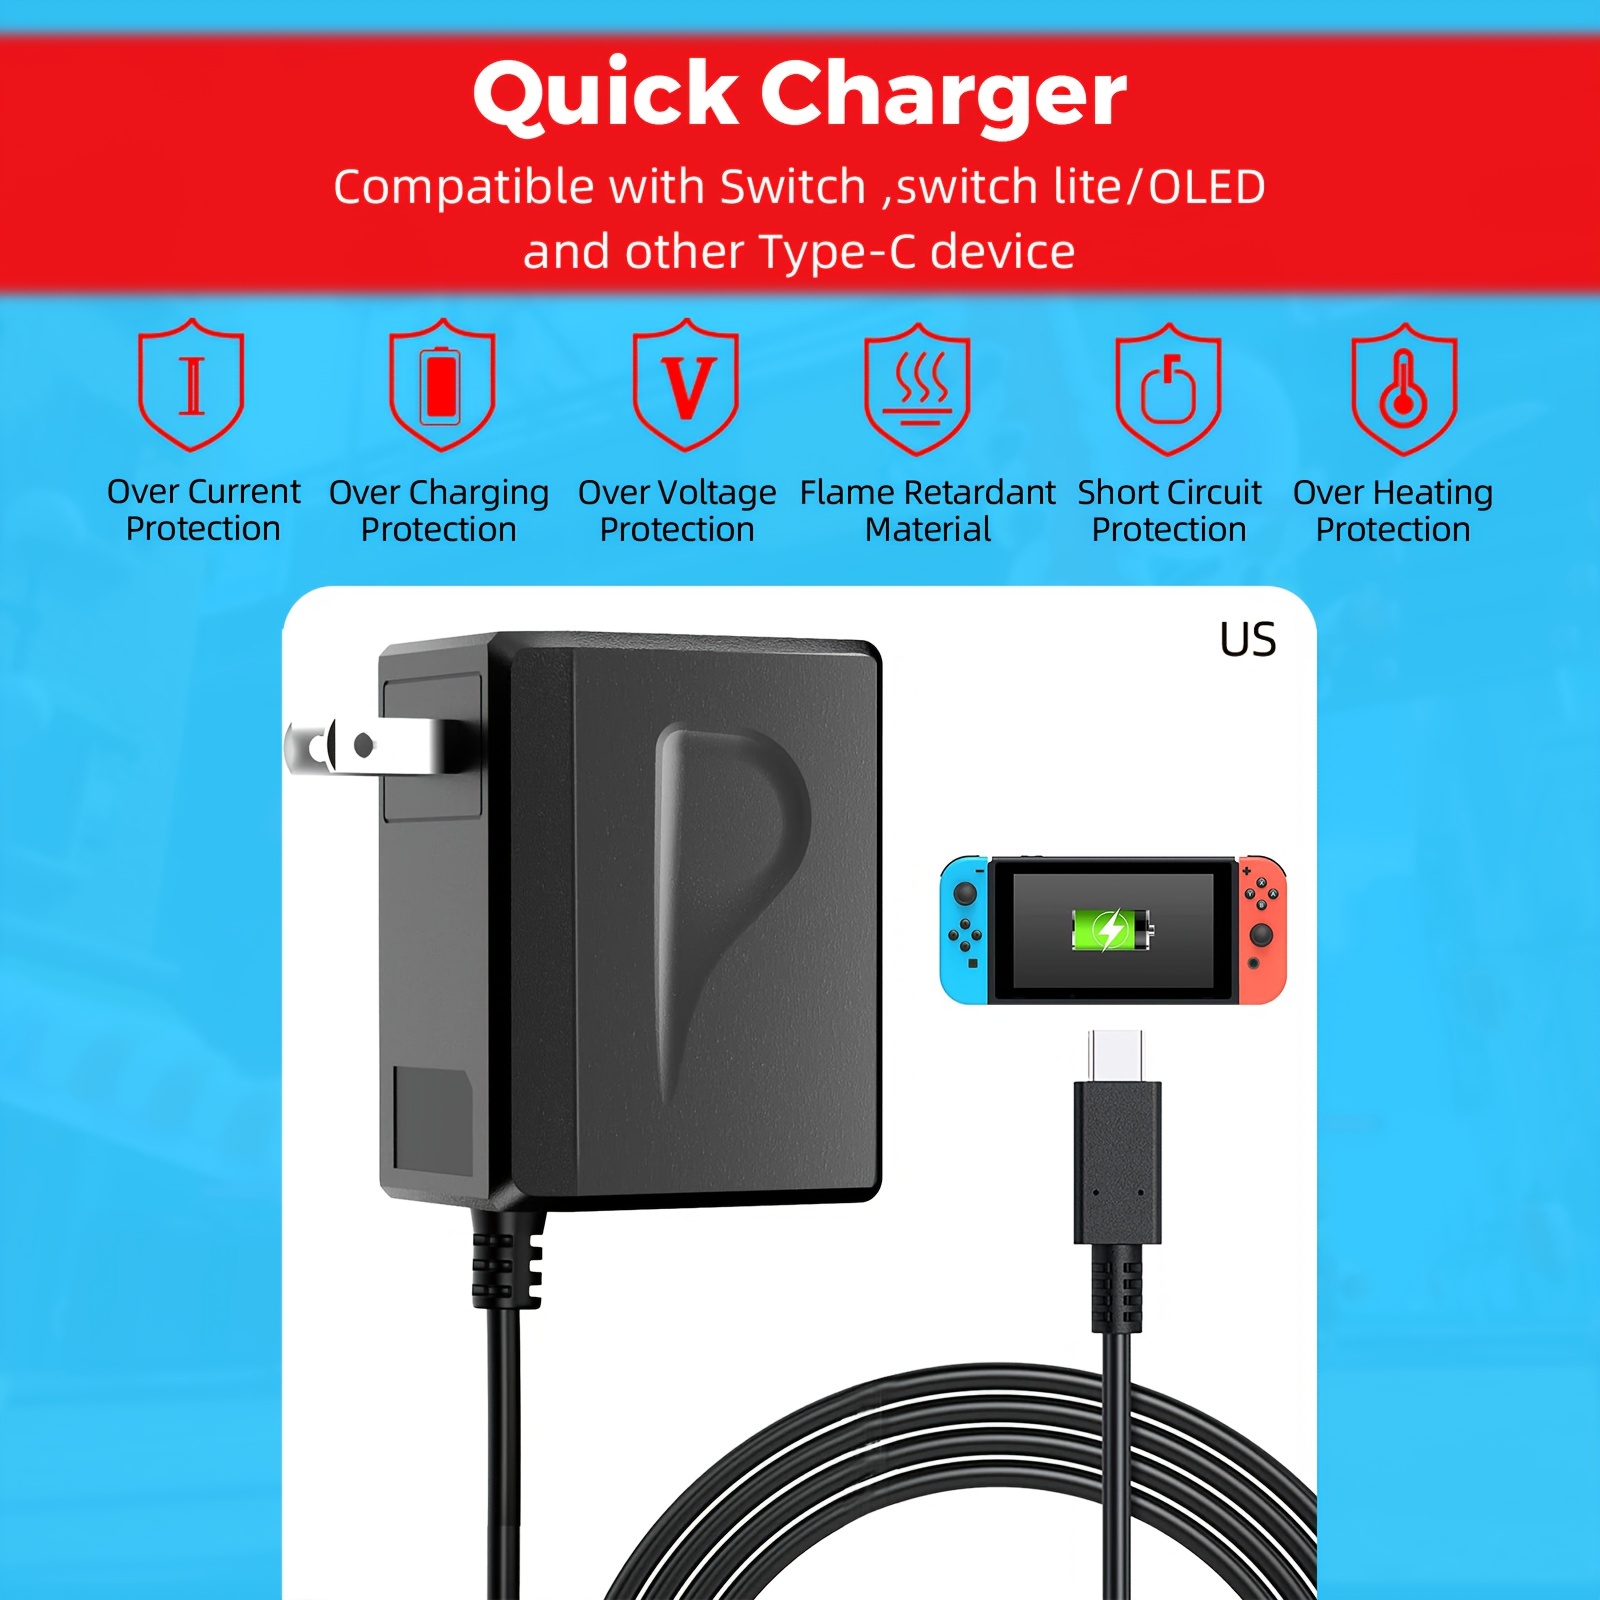 Charger for Nintendo Switch with 5FT Charging Cable, AC Power Supply  Adapter for Nintendo Switch/LITE/OLED Work as Original Nintendo Charger,  Support